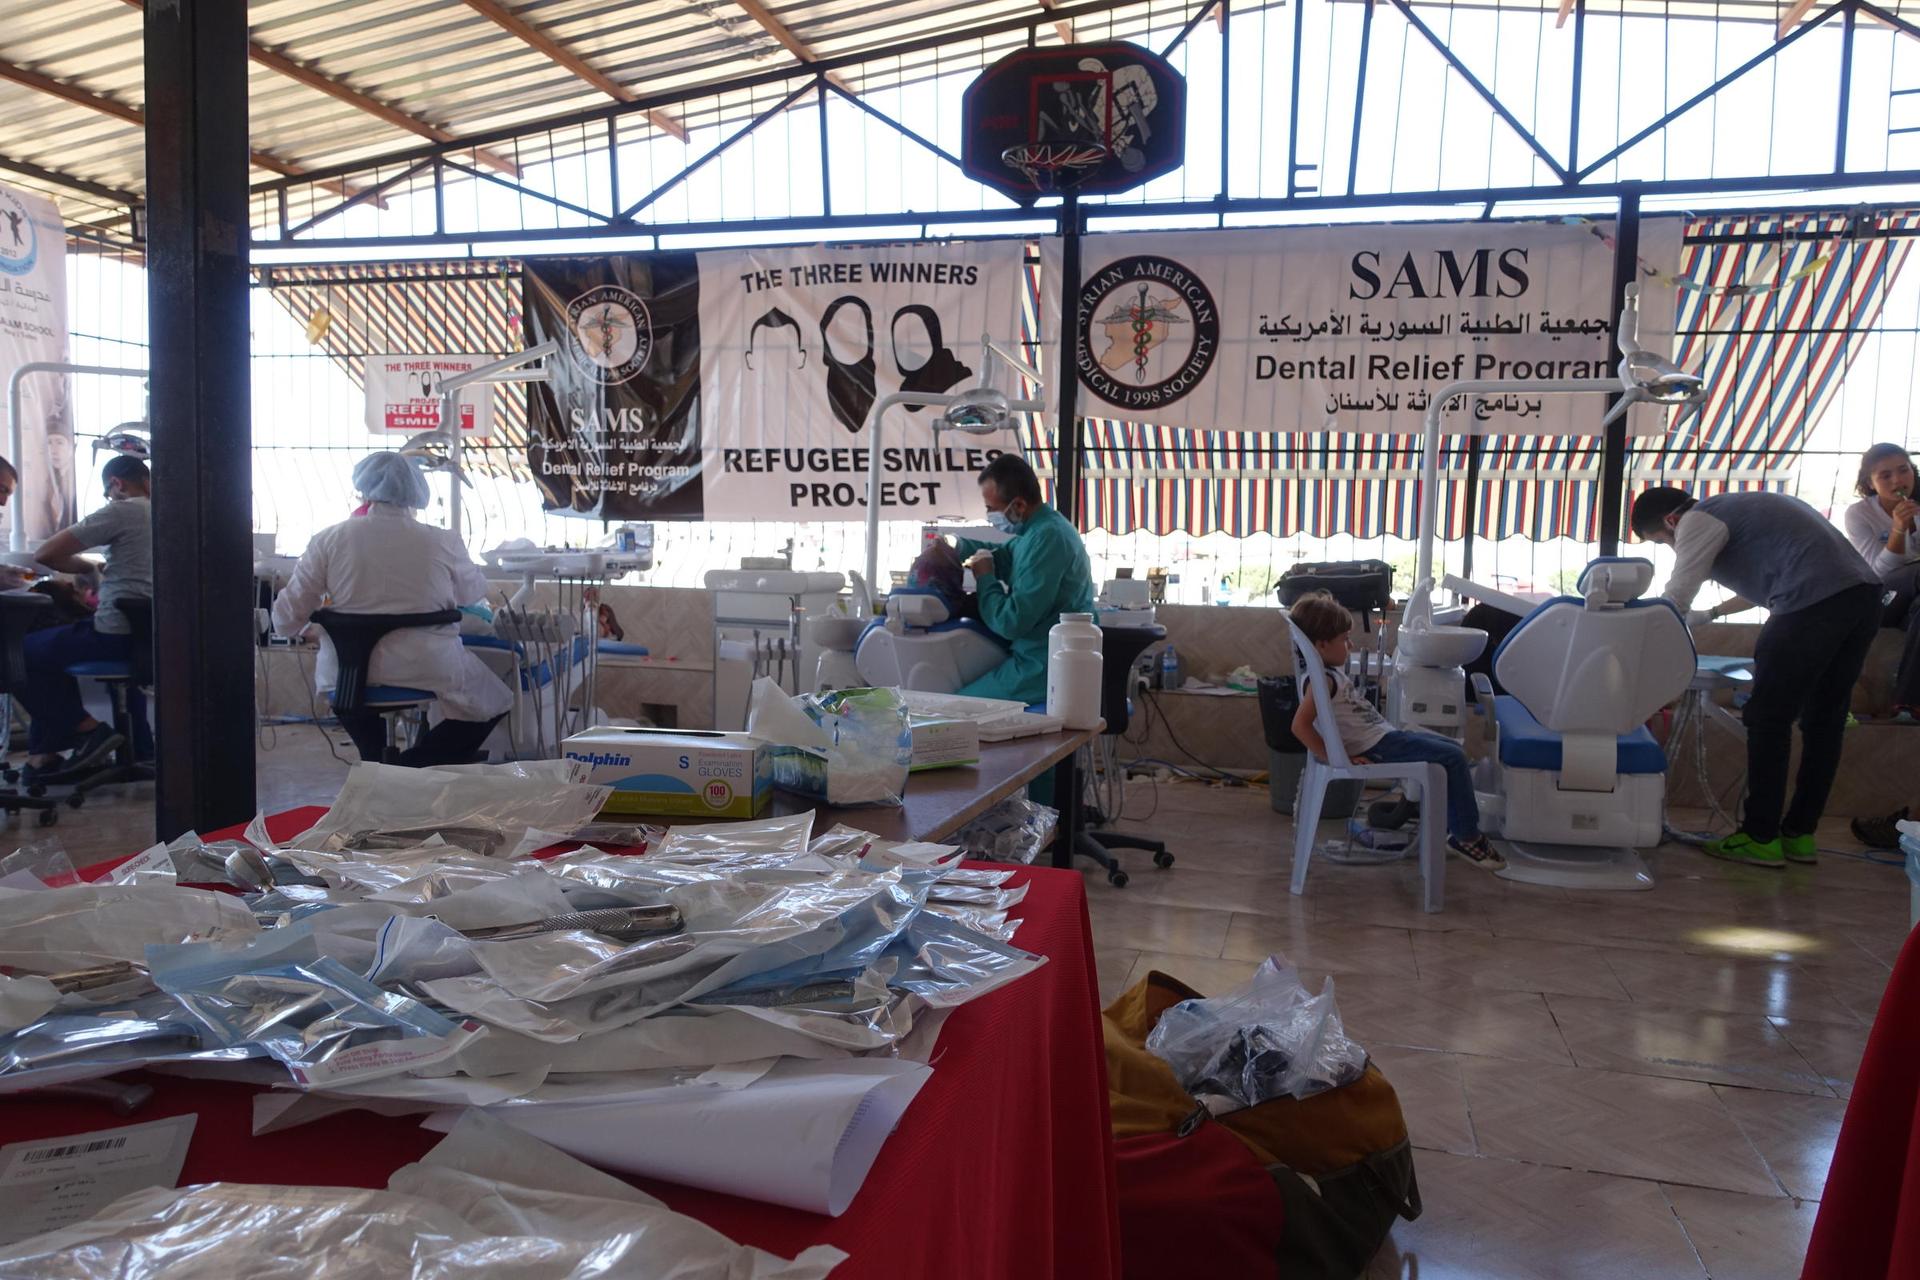 With funding from the Project Refugee Smiles fundraiser, the Syrian American Medical Society bought eight dental chairs for the temporary clinic set up at the Al-Salaam School in Reyhanli, Turkey.